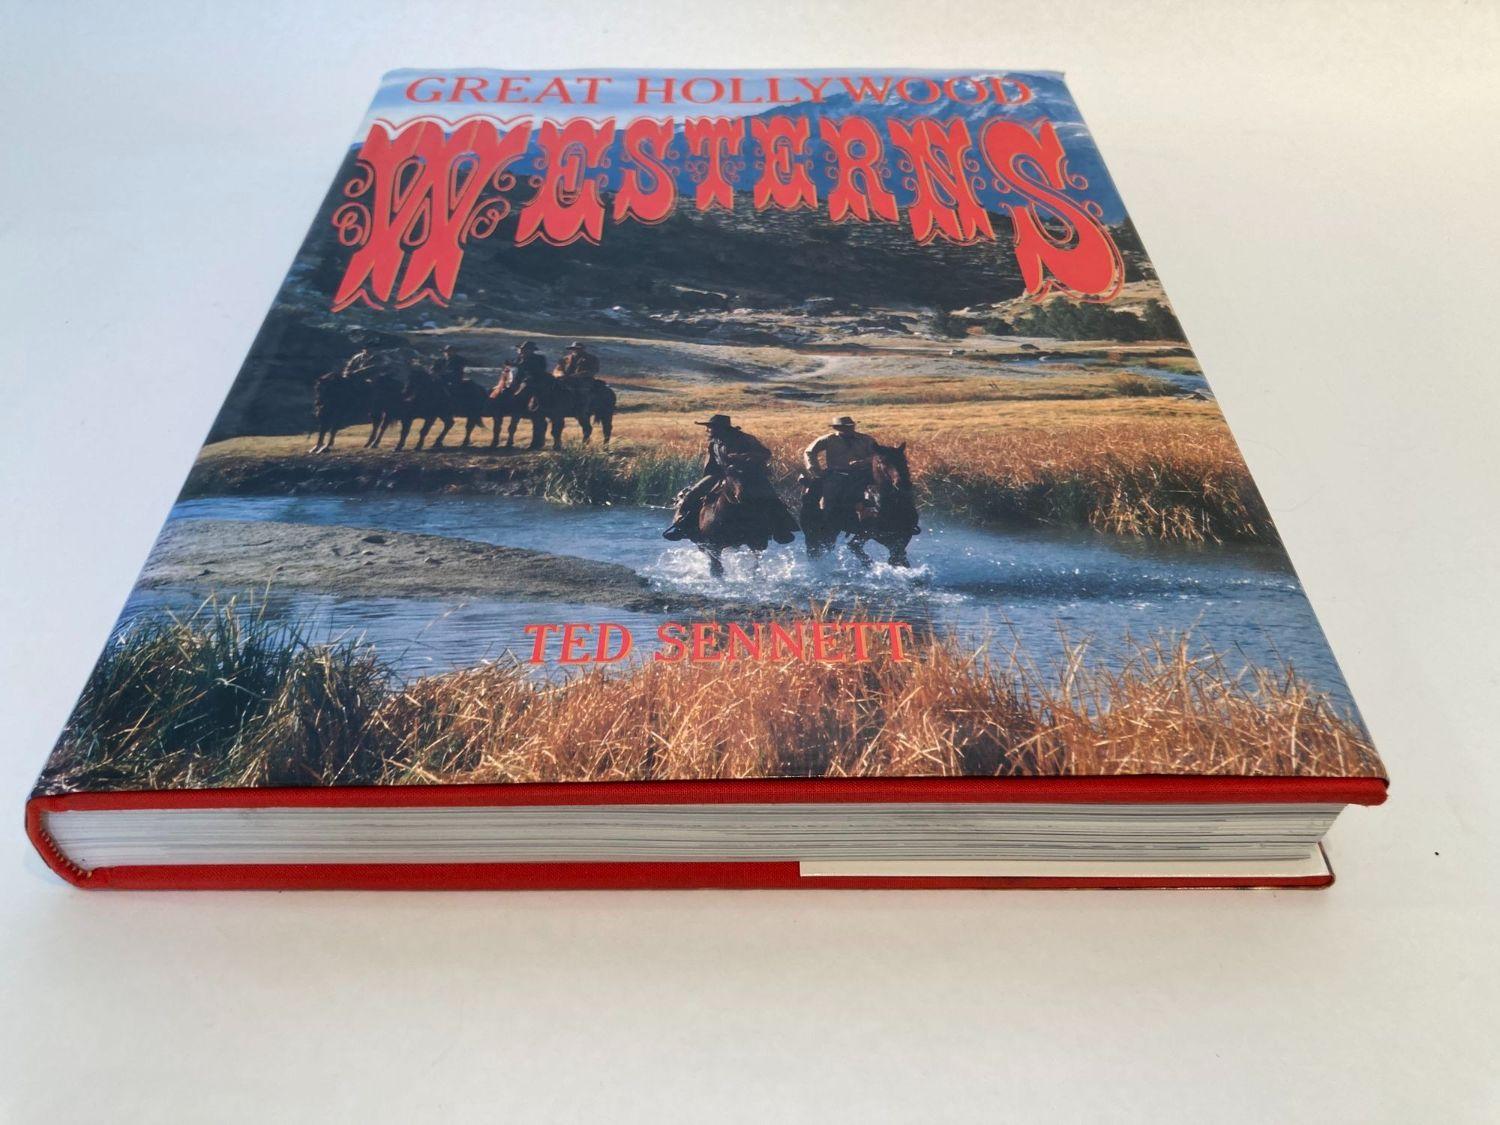 Hollywood Regency Great Hollywood Westerns Hardcover Book by Ted Sennett